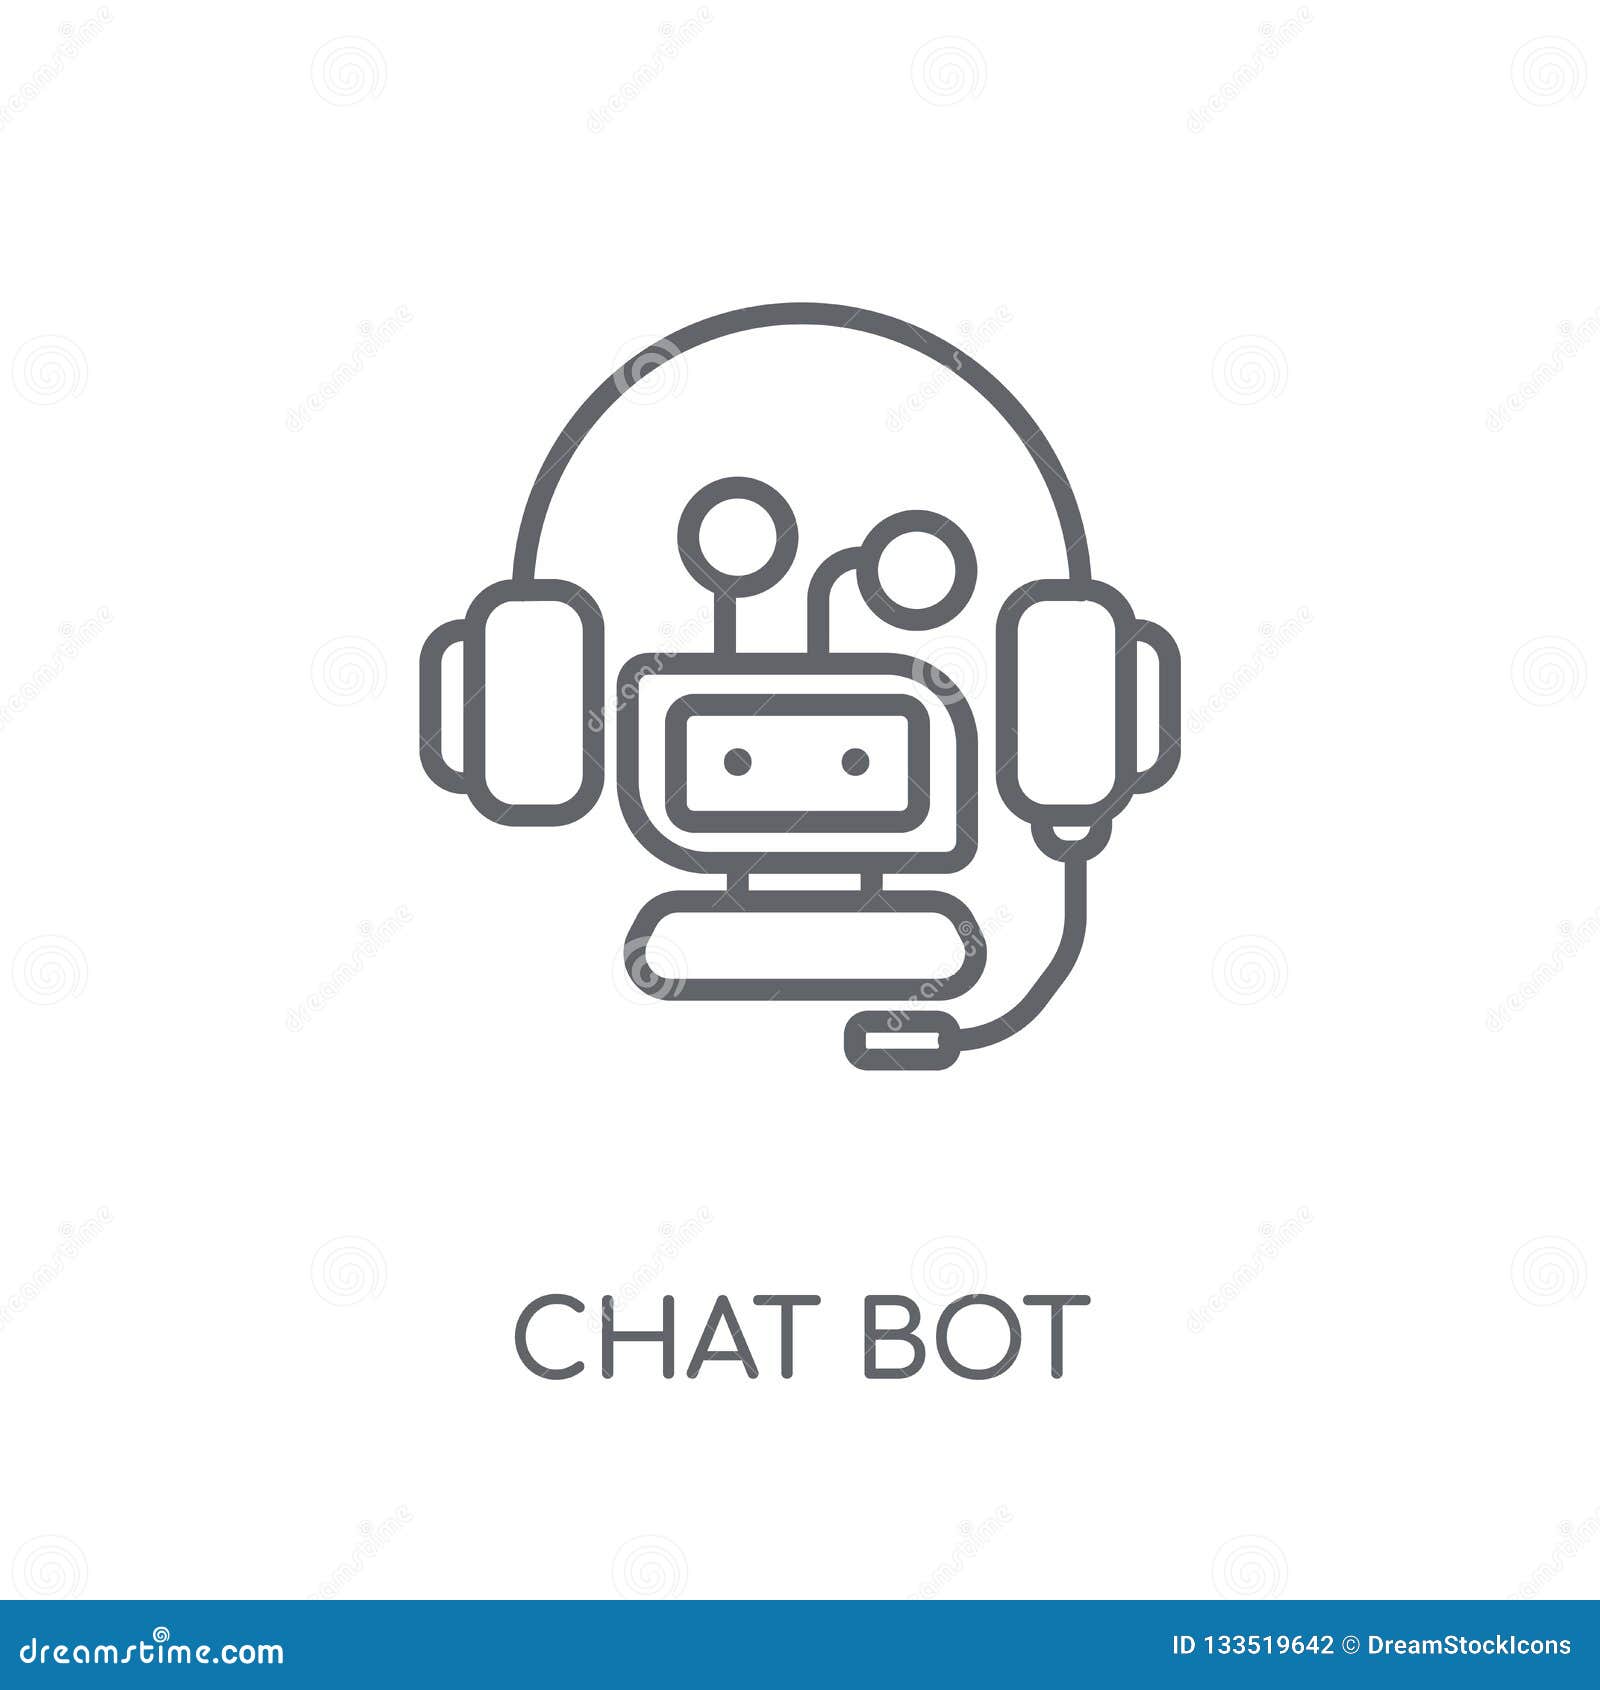 The Chatterbot Collection